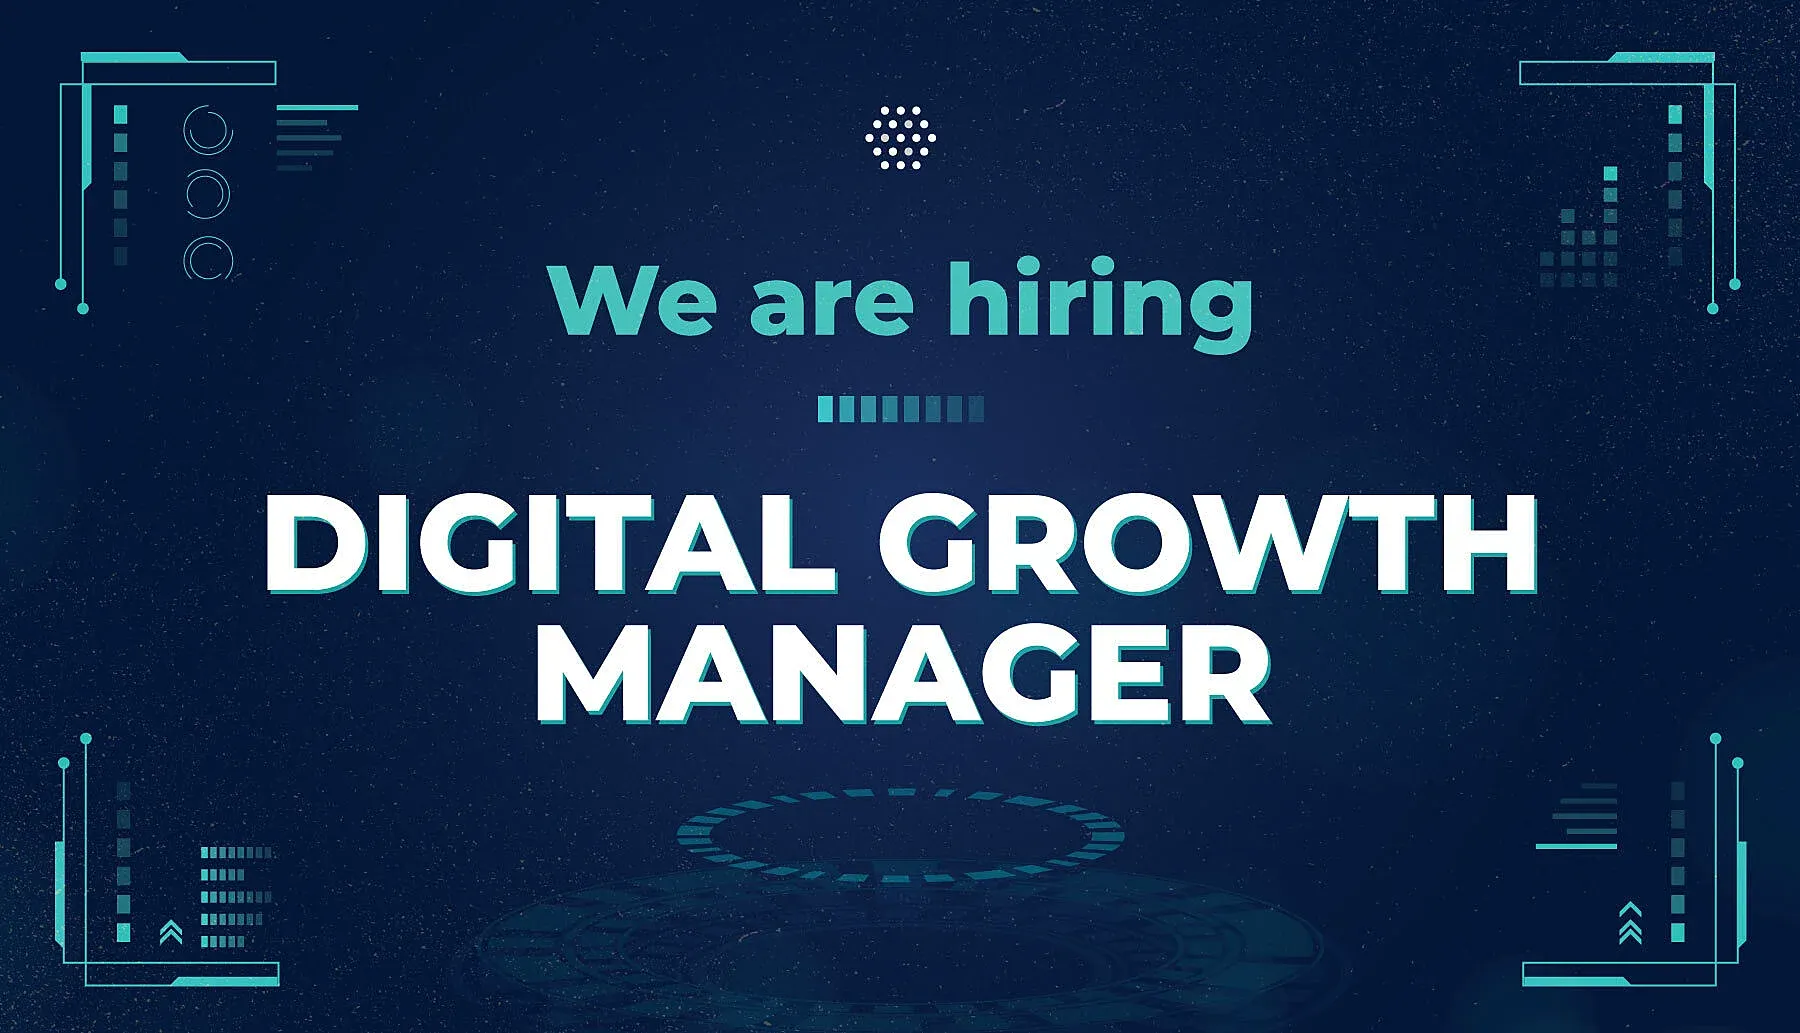 Digital Growth Manager